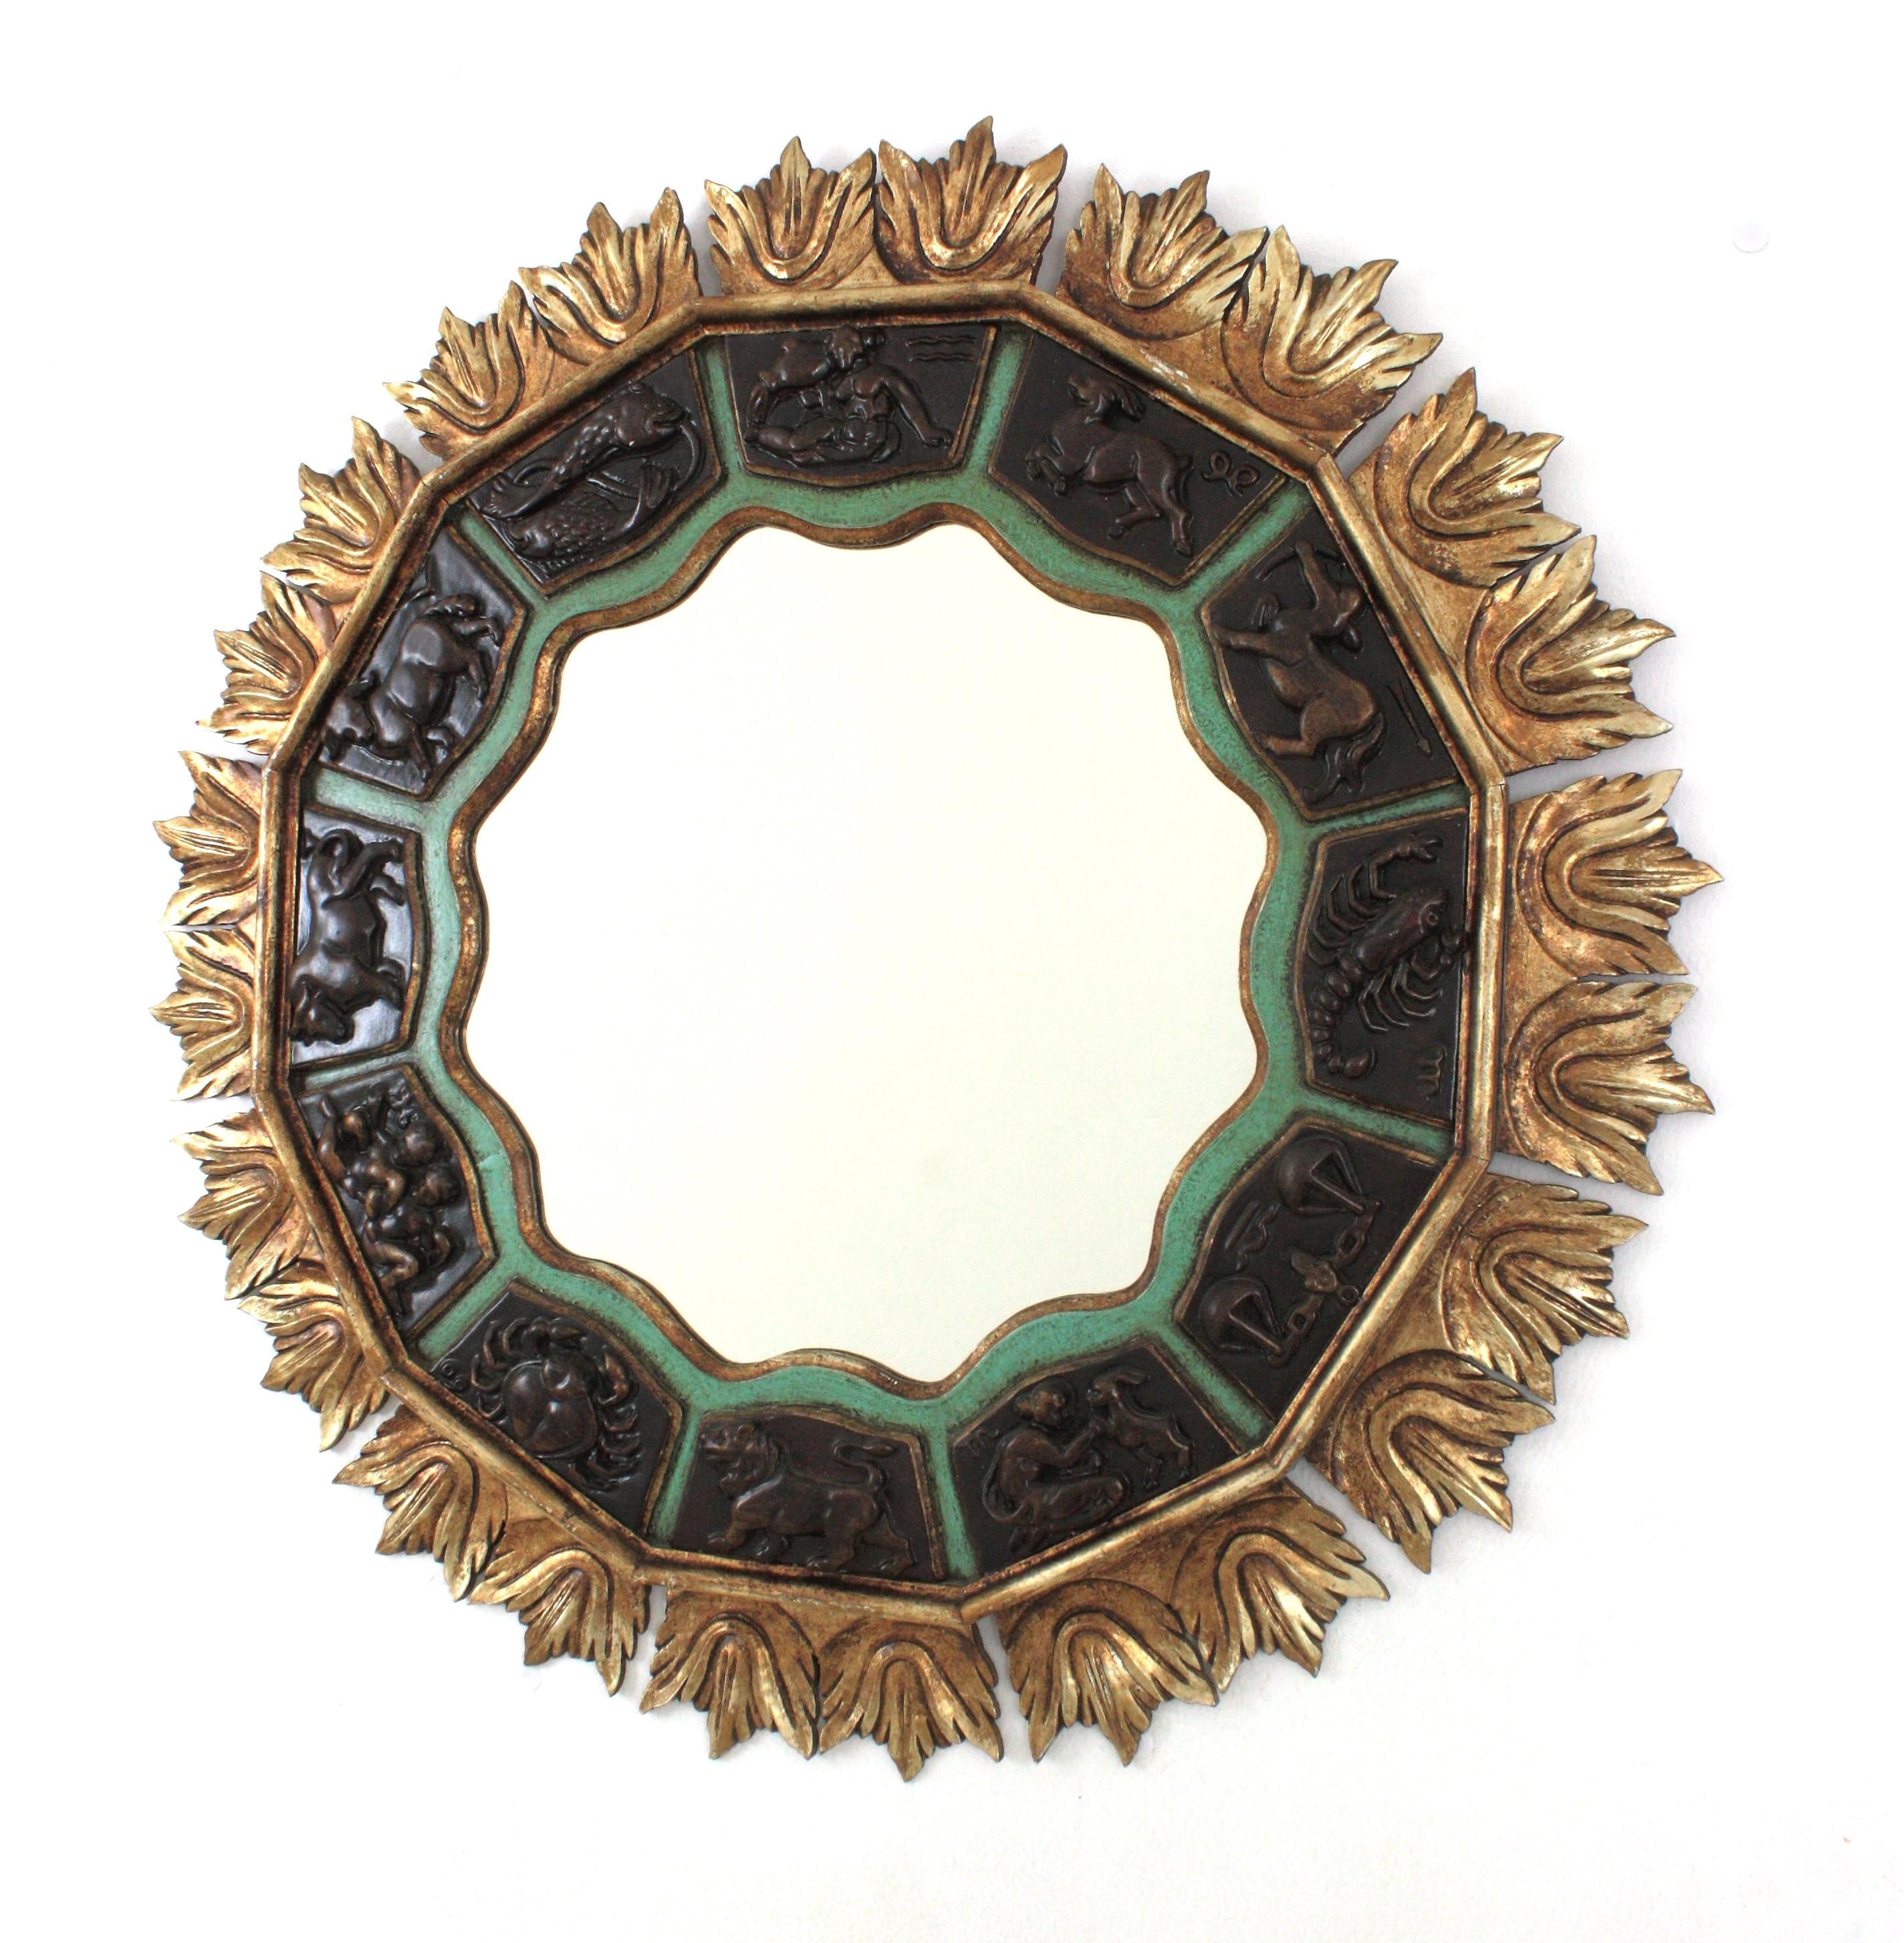 Sunburst Zodiac Mirror with Carved Giltwood & Green Frame, 1950s For Sale 3